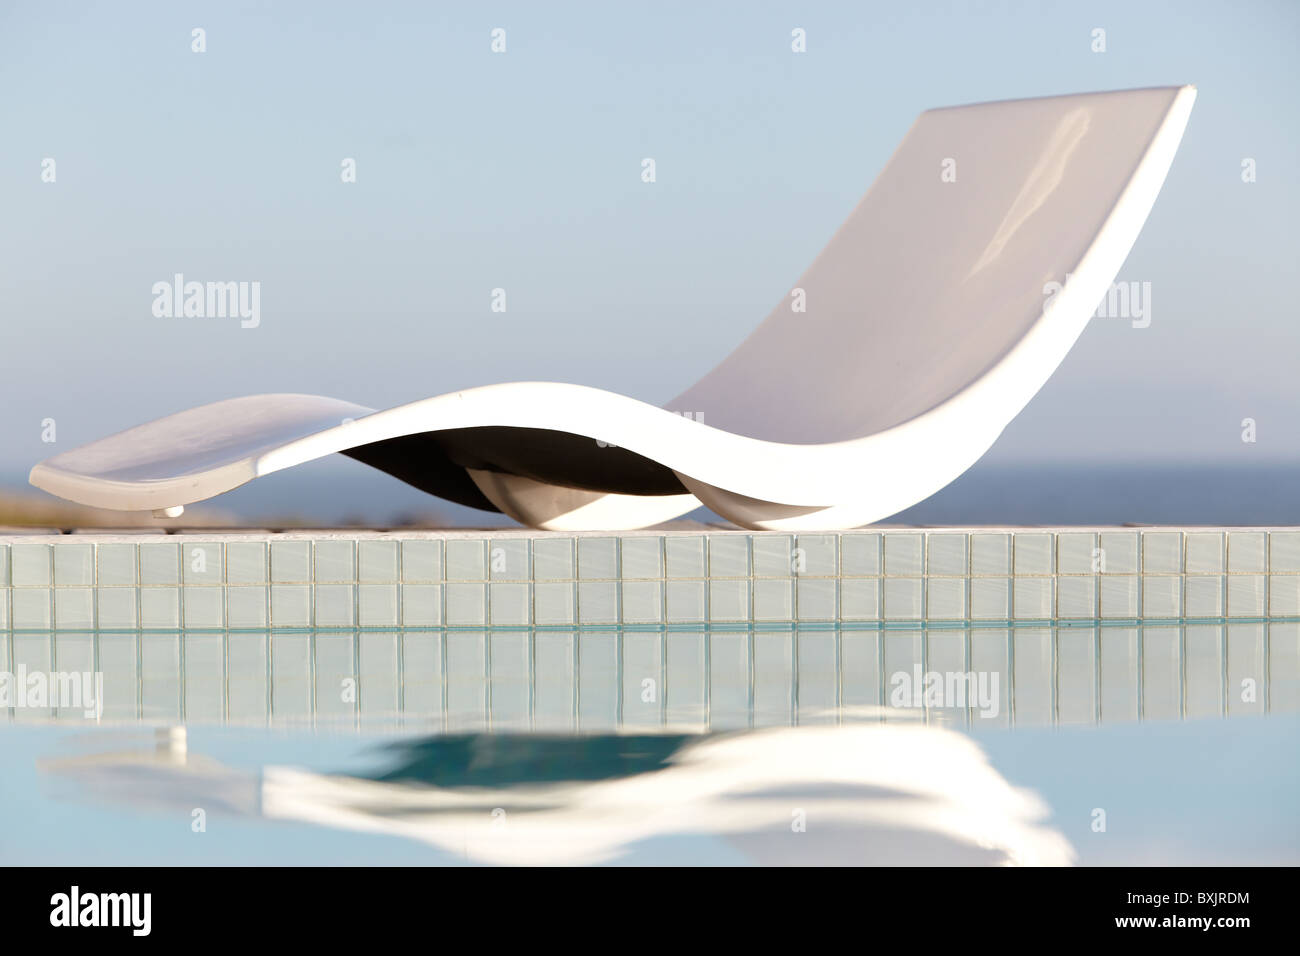 Abstract sun lounger by the pool side Stock Photo